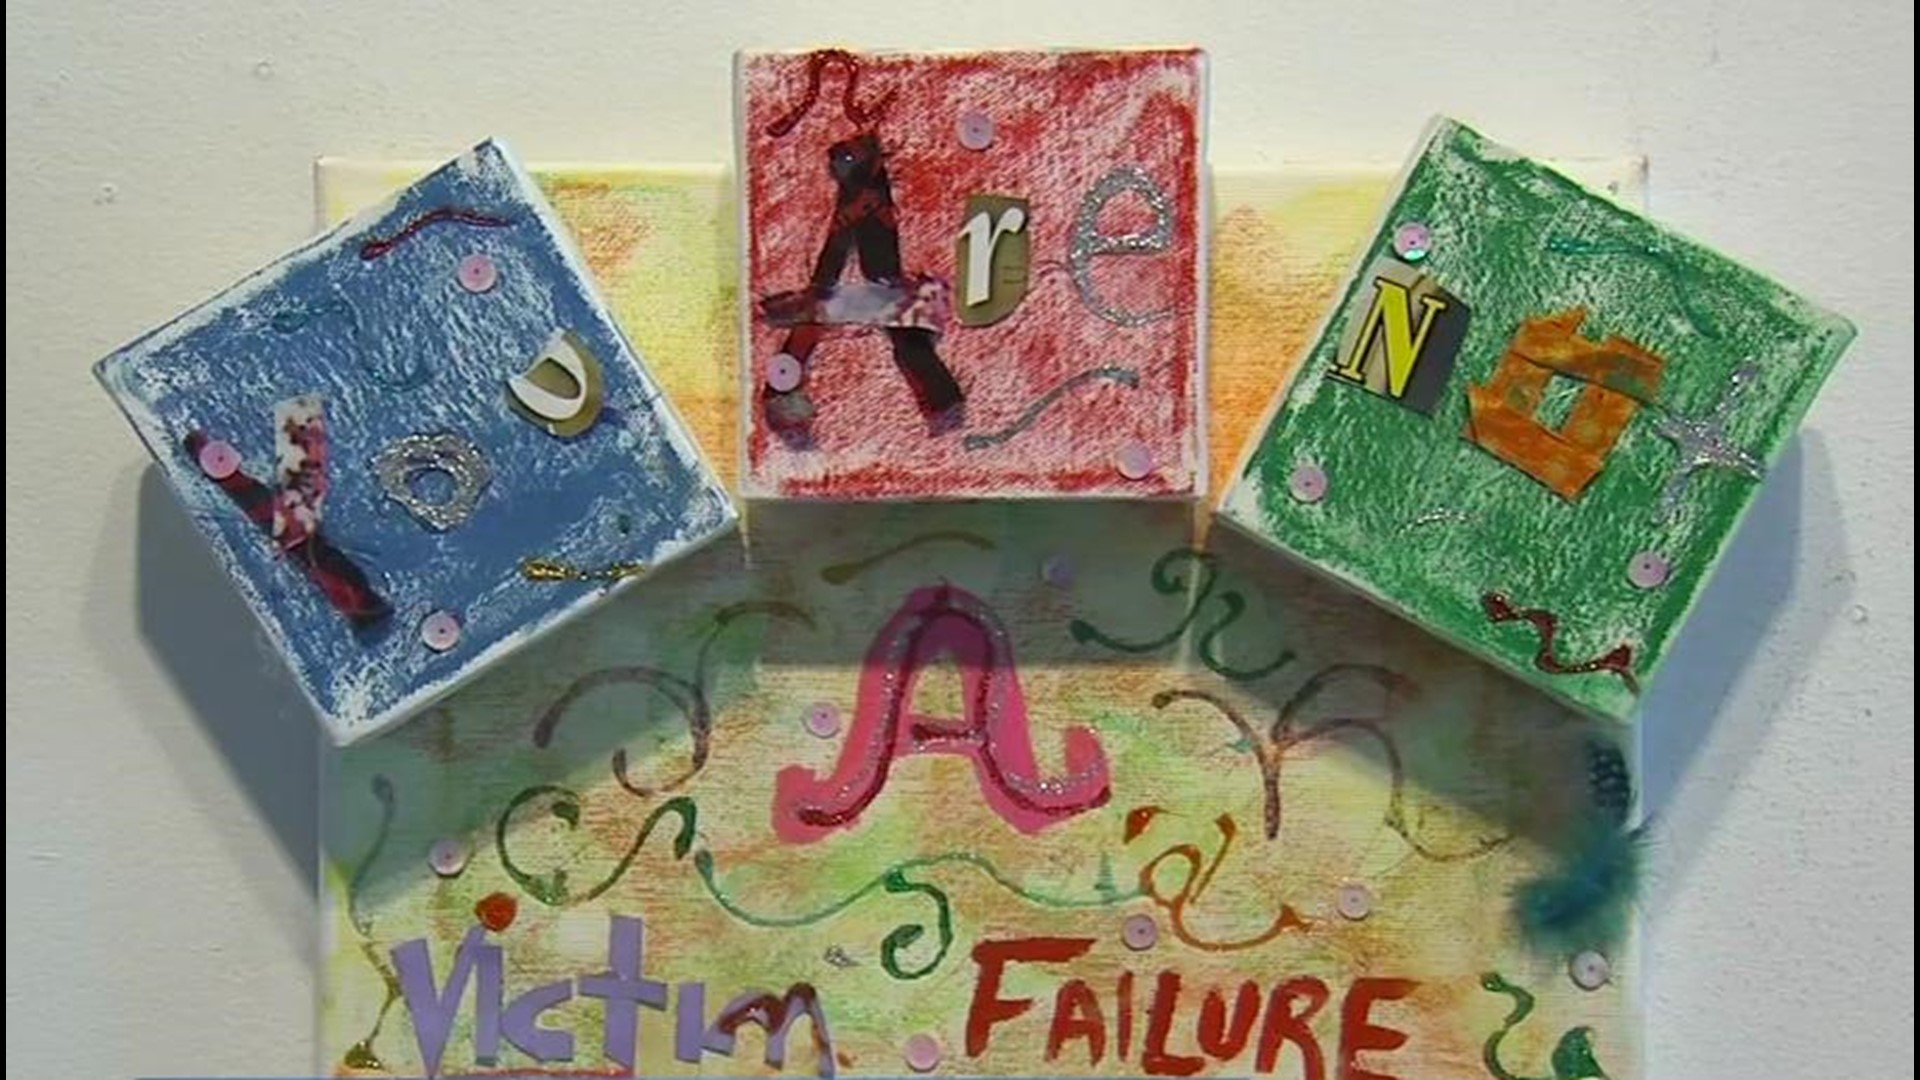 Students Use Art To Send A Message Against Bullying